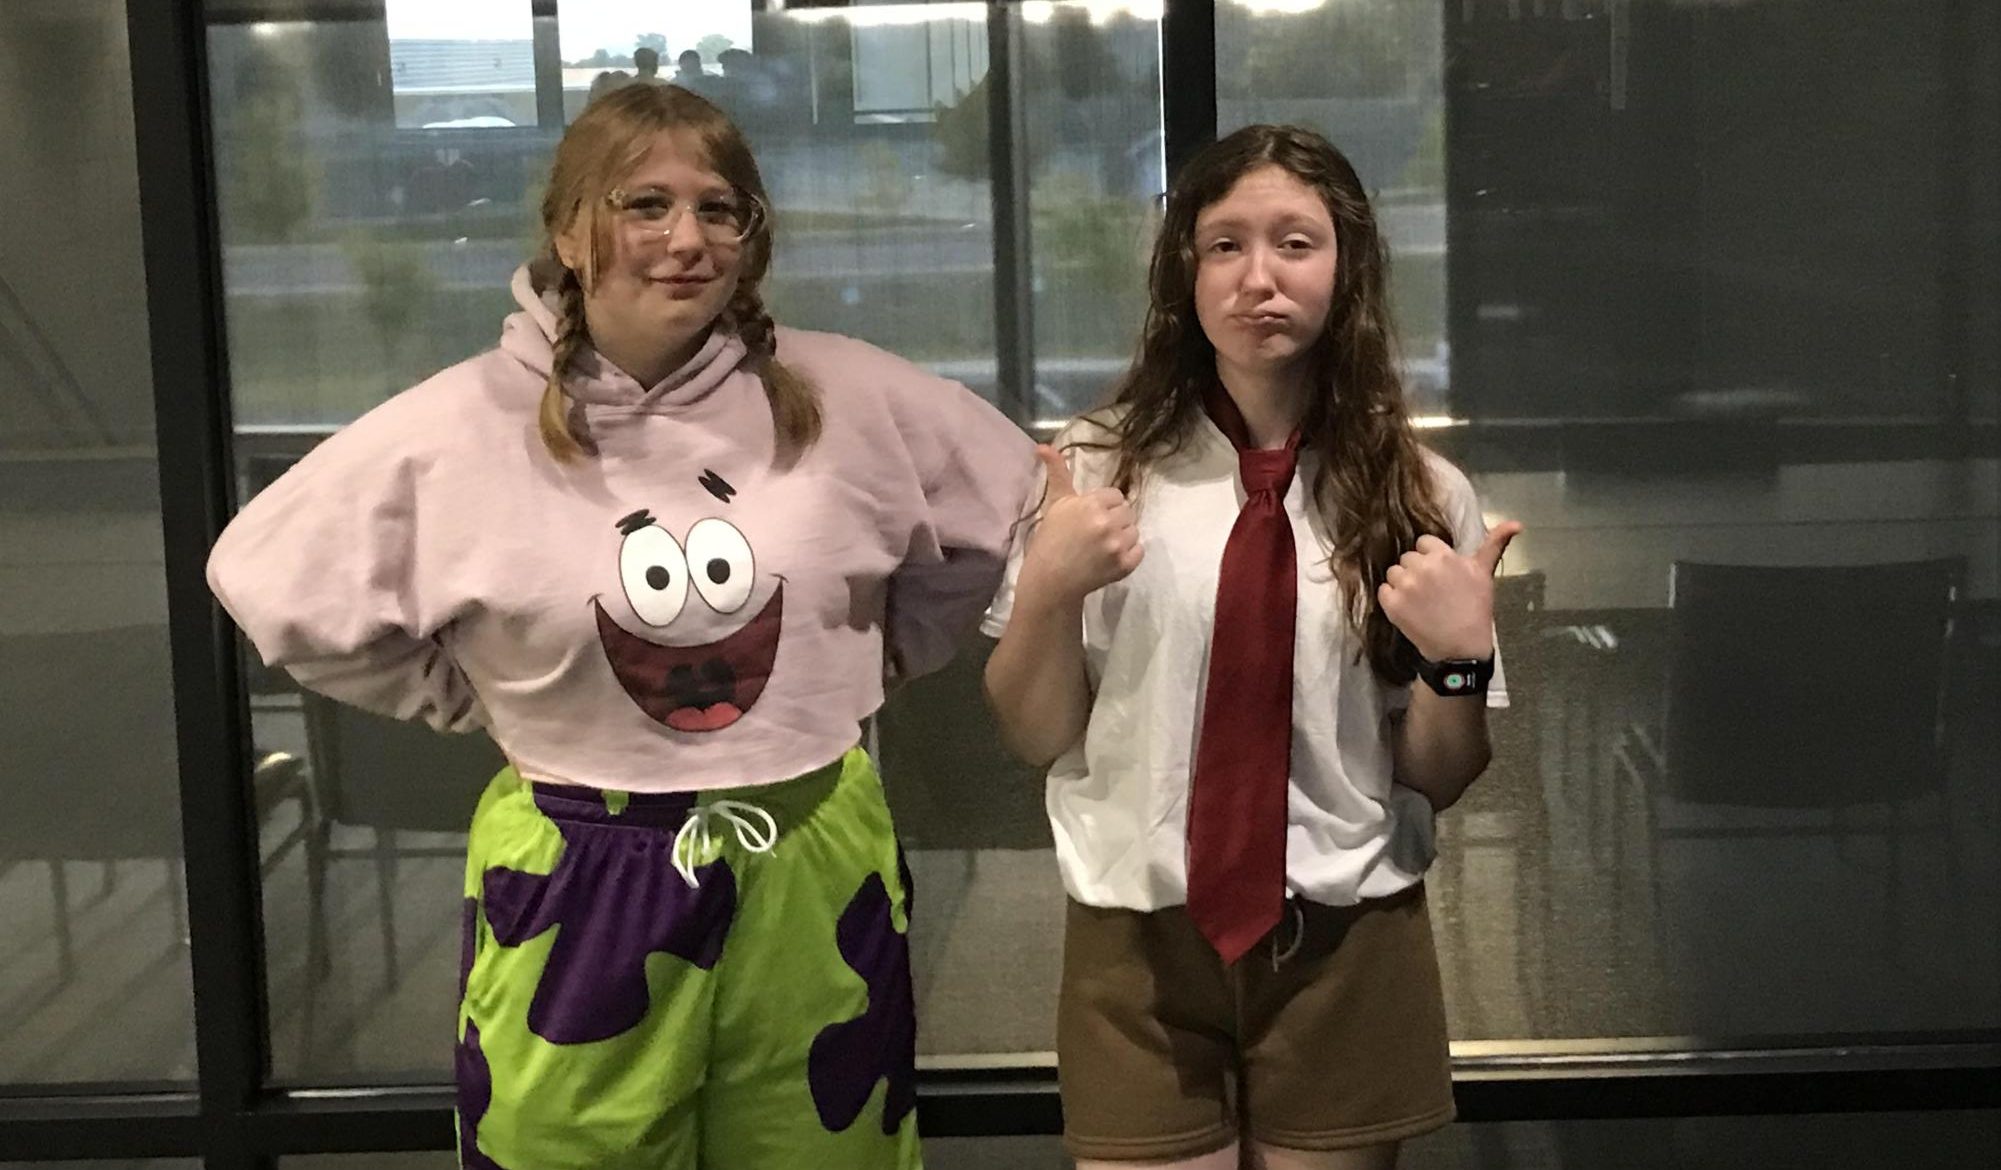  Patrick Star (Zoey Delong)  and Spongebob SquarePants  (Celsie Benson) pause their day for a picture. 